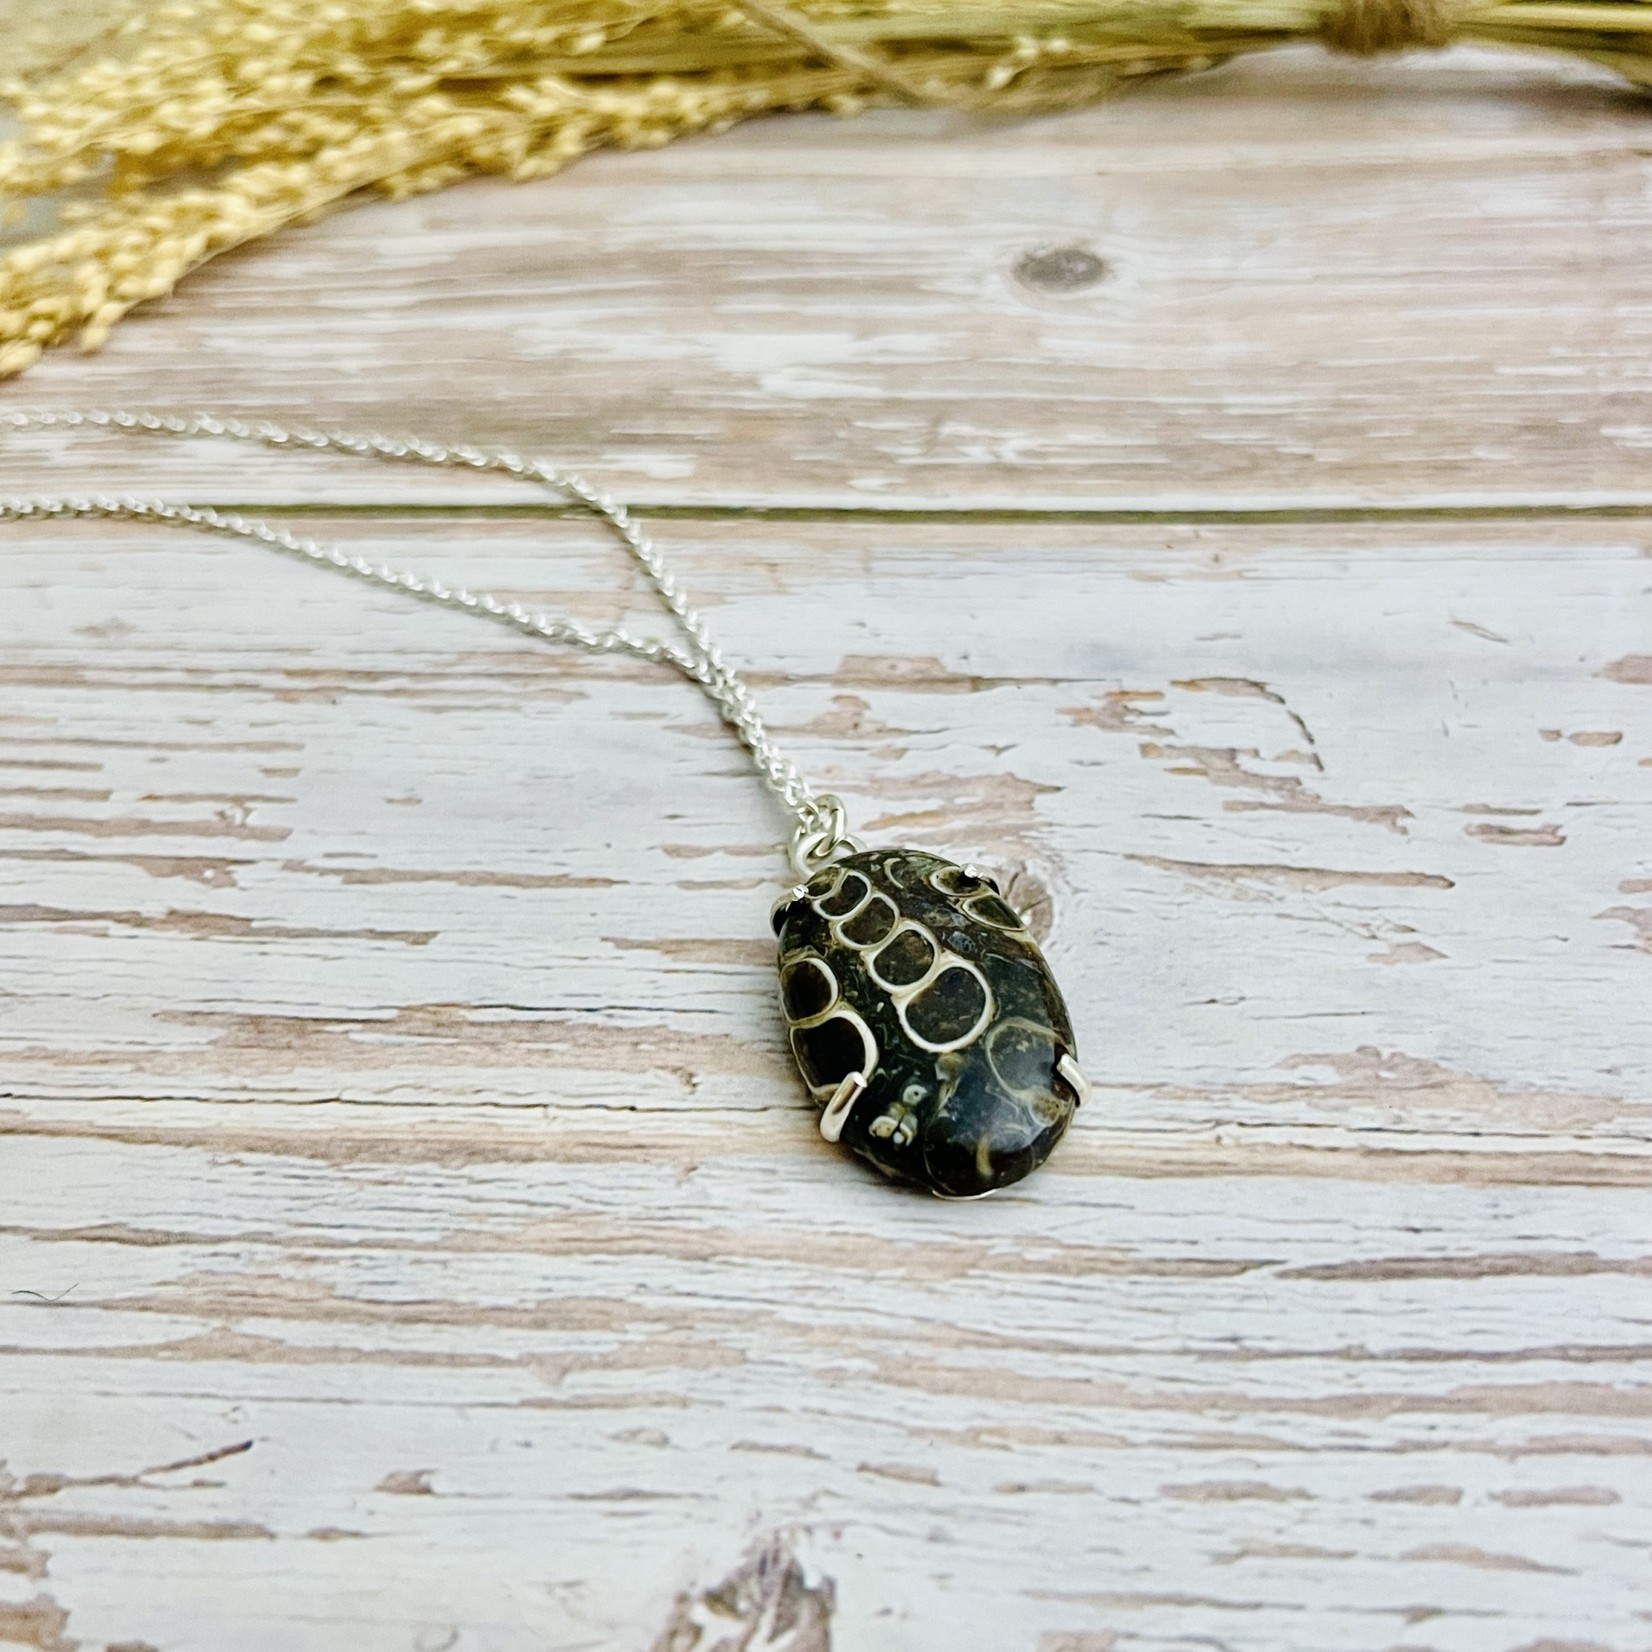 Handmade Silver Necklace with prong set turritella agate